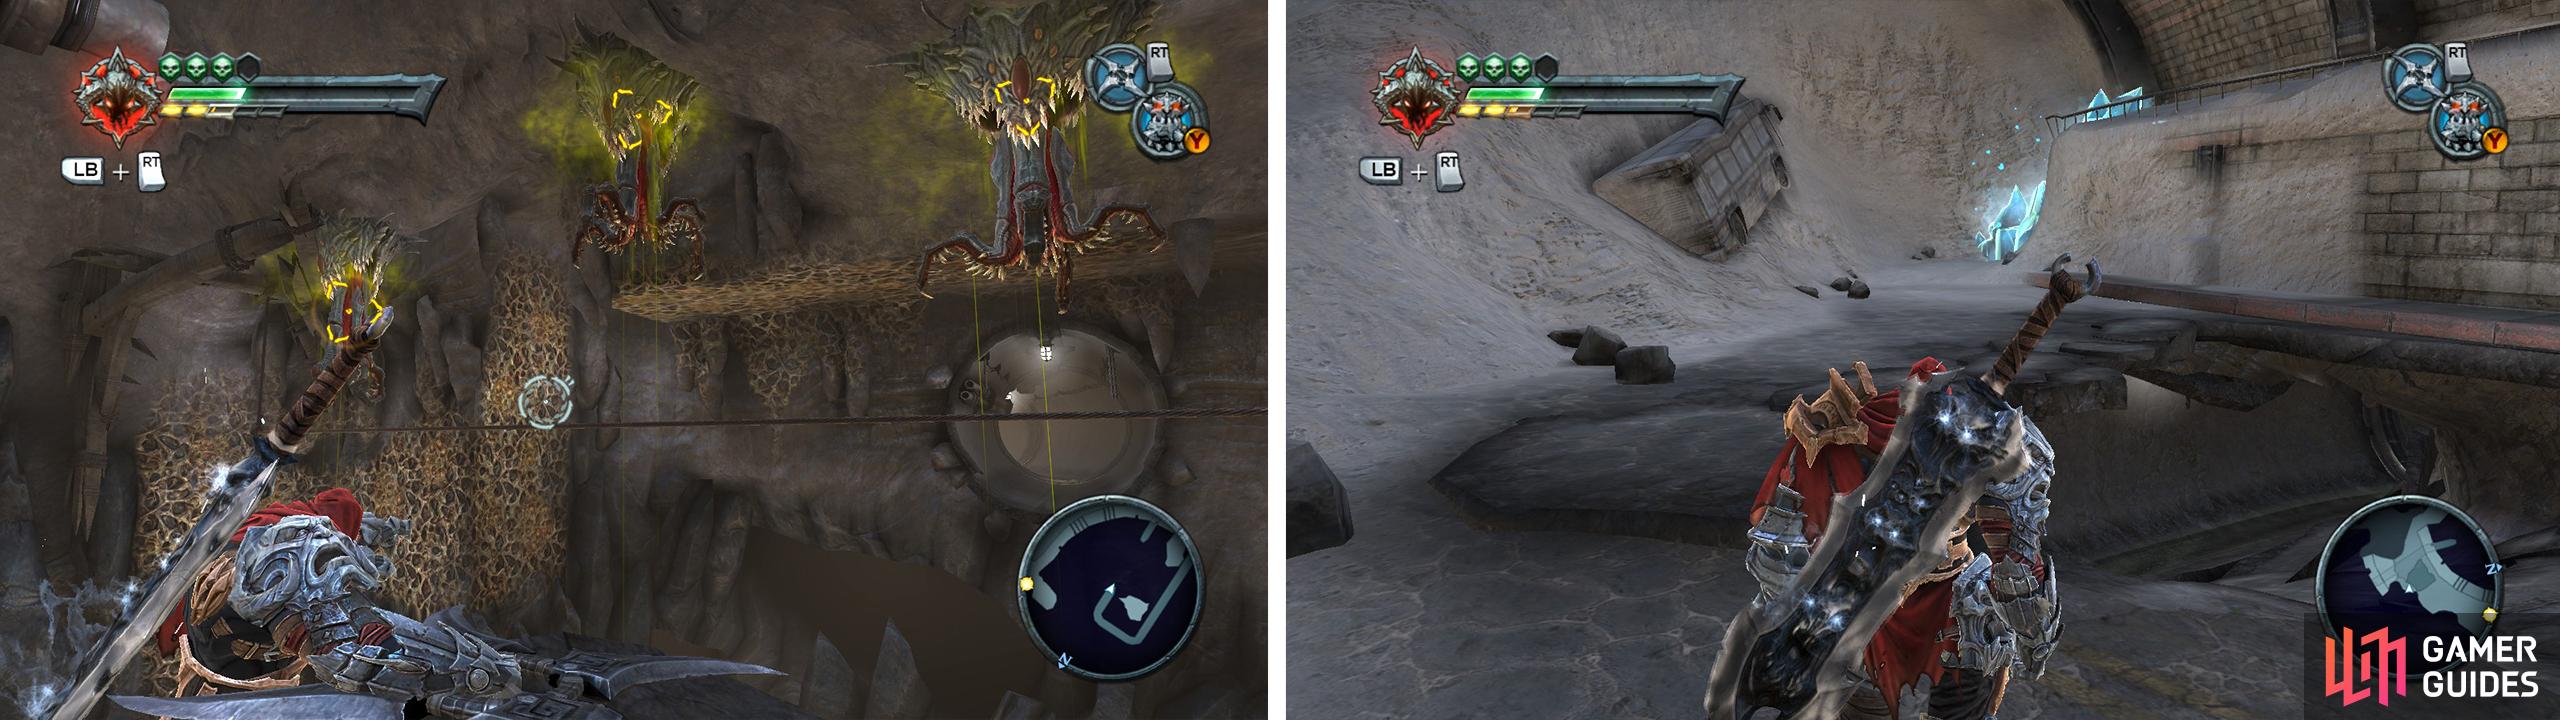 Use the cross-blade to hit all three Demon Plants at once (left) to get across the rope. Upon exiting the next tunnel, look behind you to find some blue crystals (right). Behind these is a Life Stone Shard.